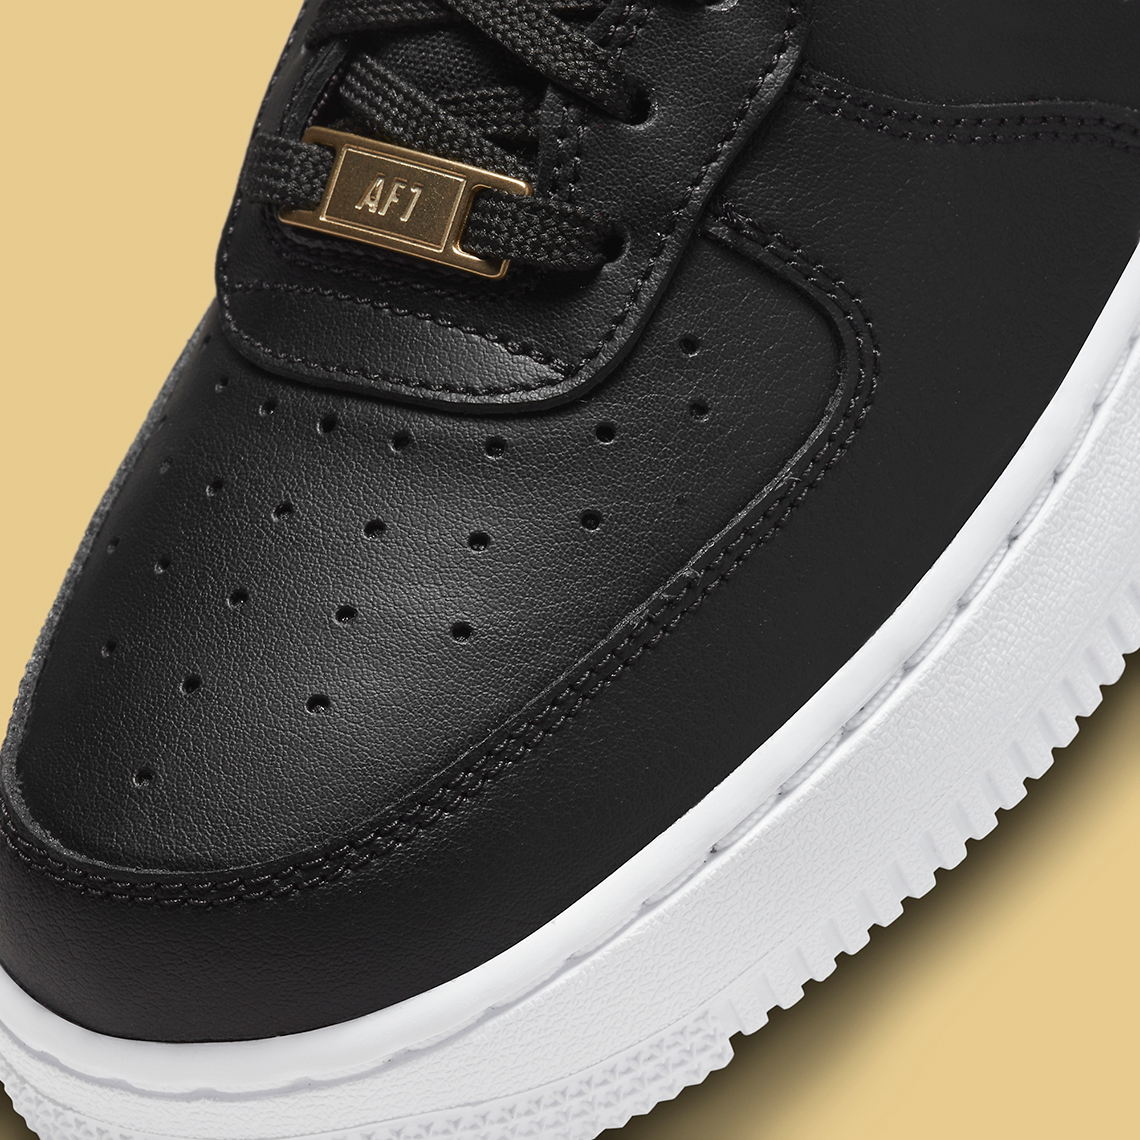 Nike Air Force 1 Low Black Gold DD1523-001 Release Date - SBD